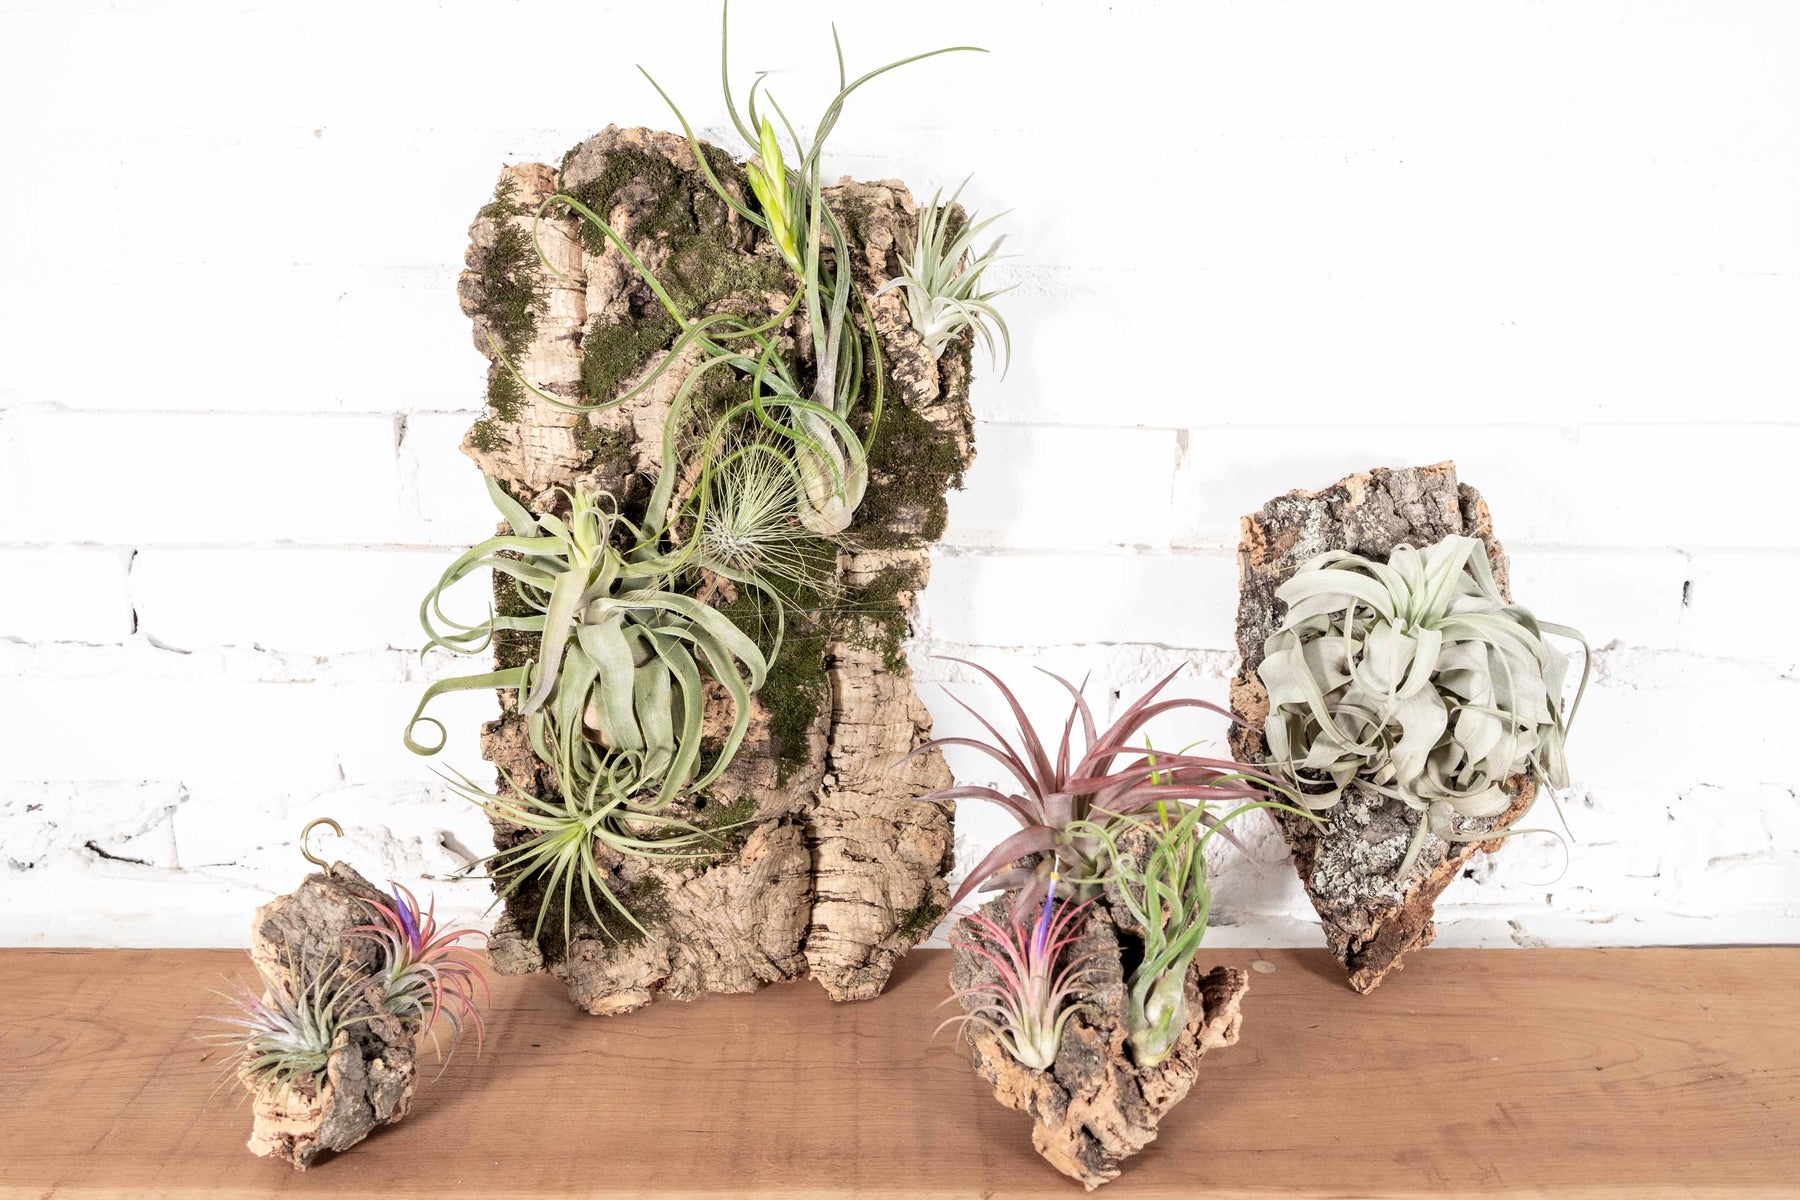 Varying Sizes of Virgin Cork Bark Displays with Attached Tillandsia Air Plants